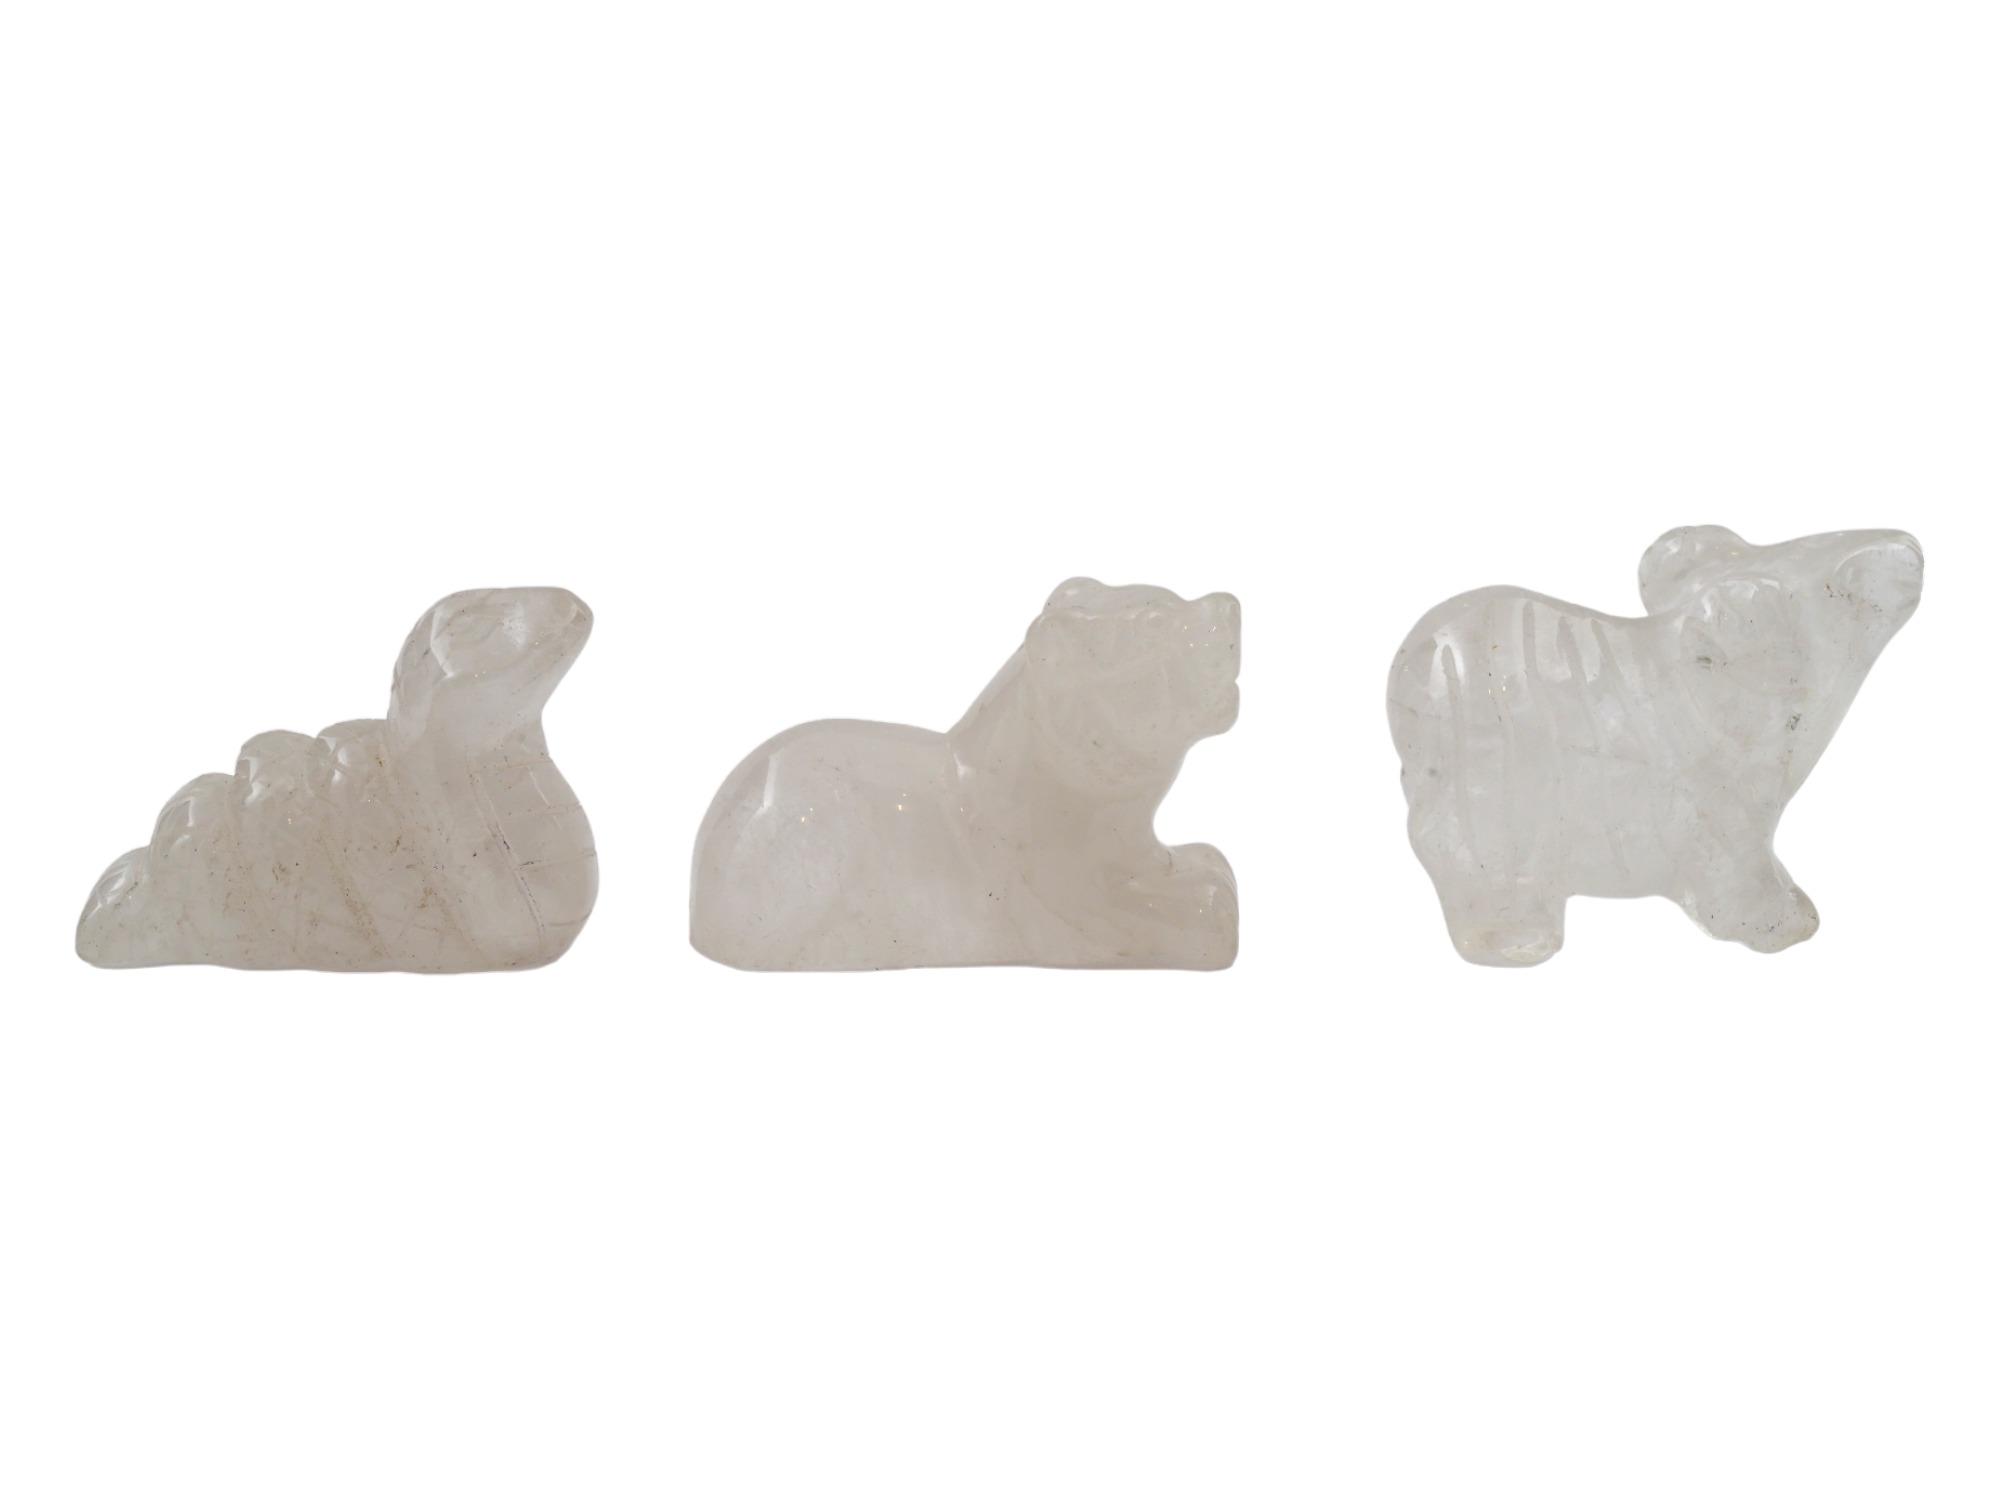 VINTAGE COLLECTION OF CARVED GEMSTONE ANIMAL FIGURINES PIC-4